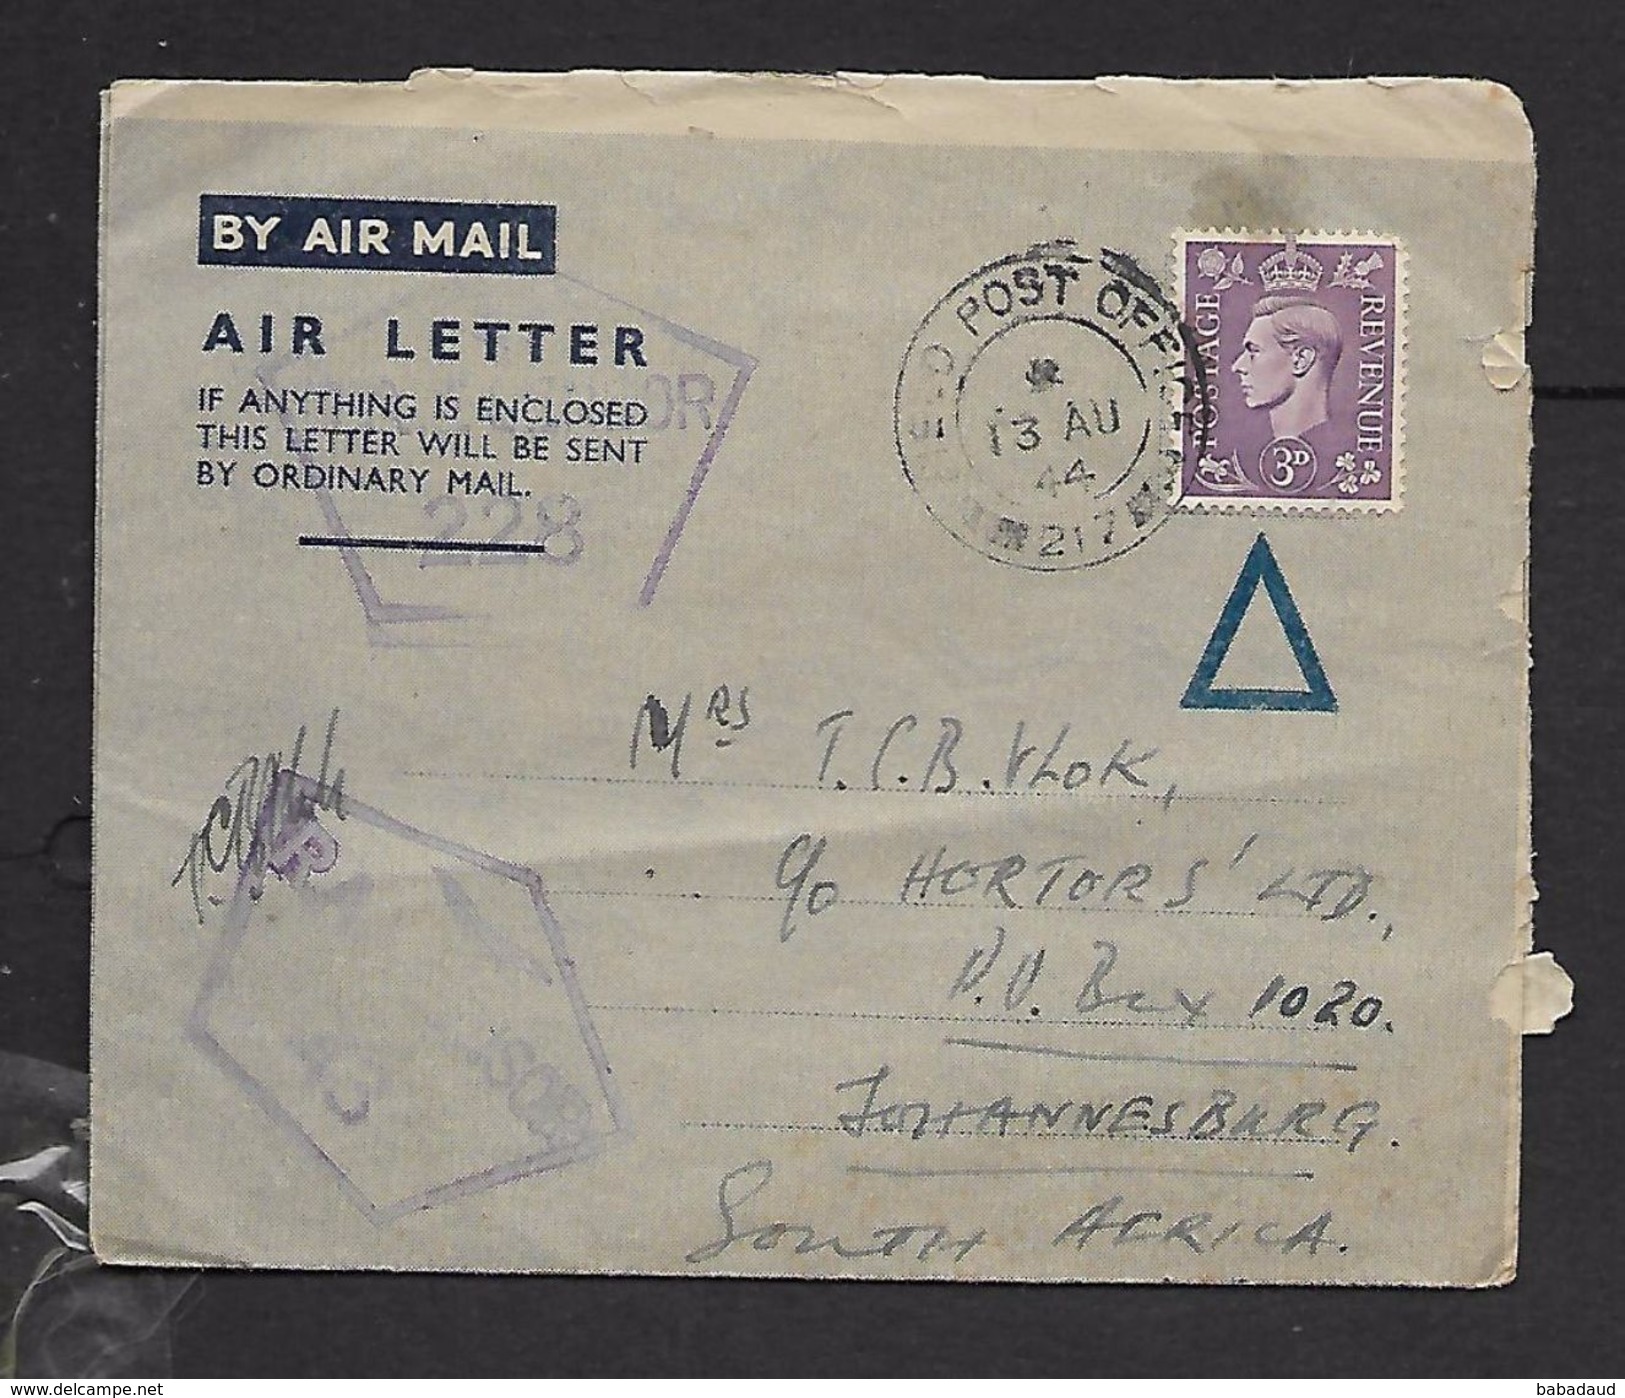 FIELD POST OFFICE 217 13 AU 44 Air Letter > South Africa, RAF CENSOR S 228 & 43 - Covers & Documents